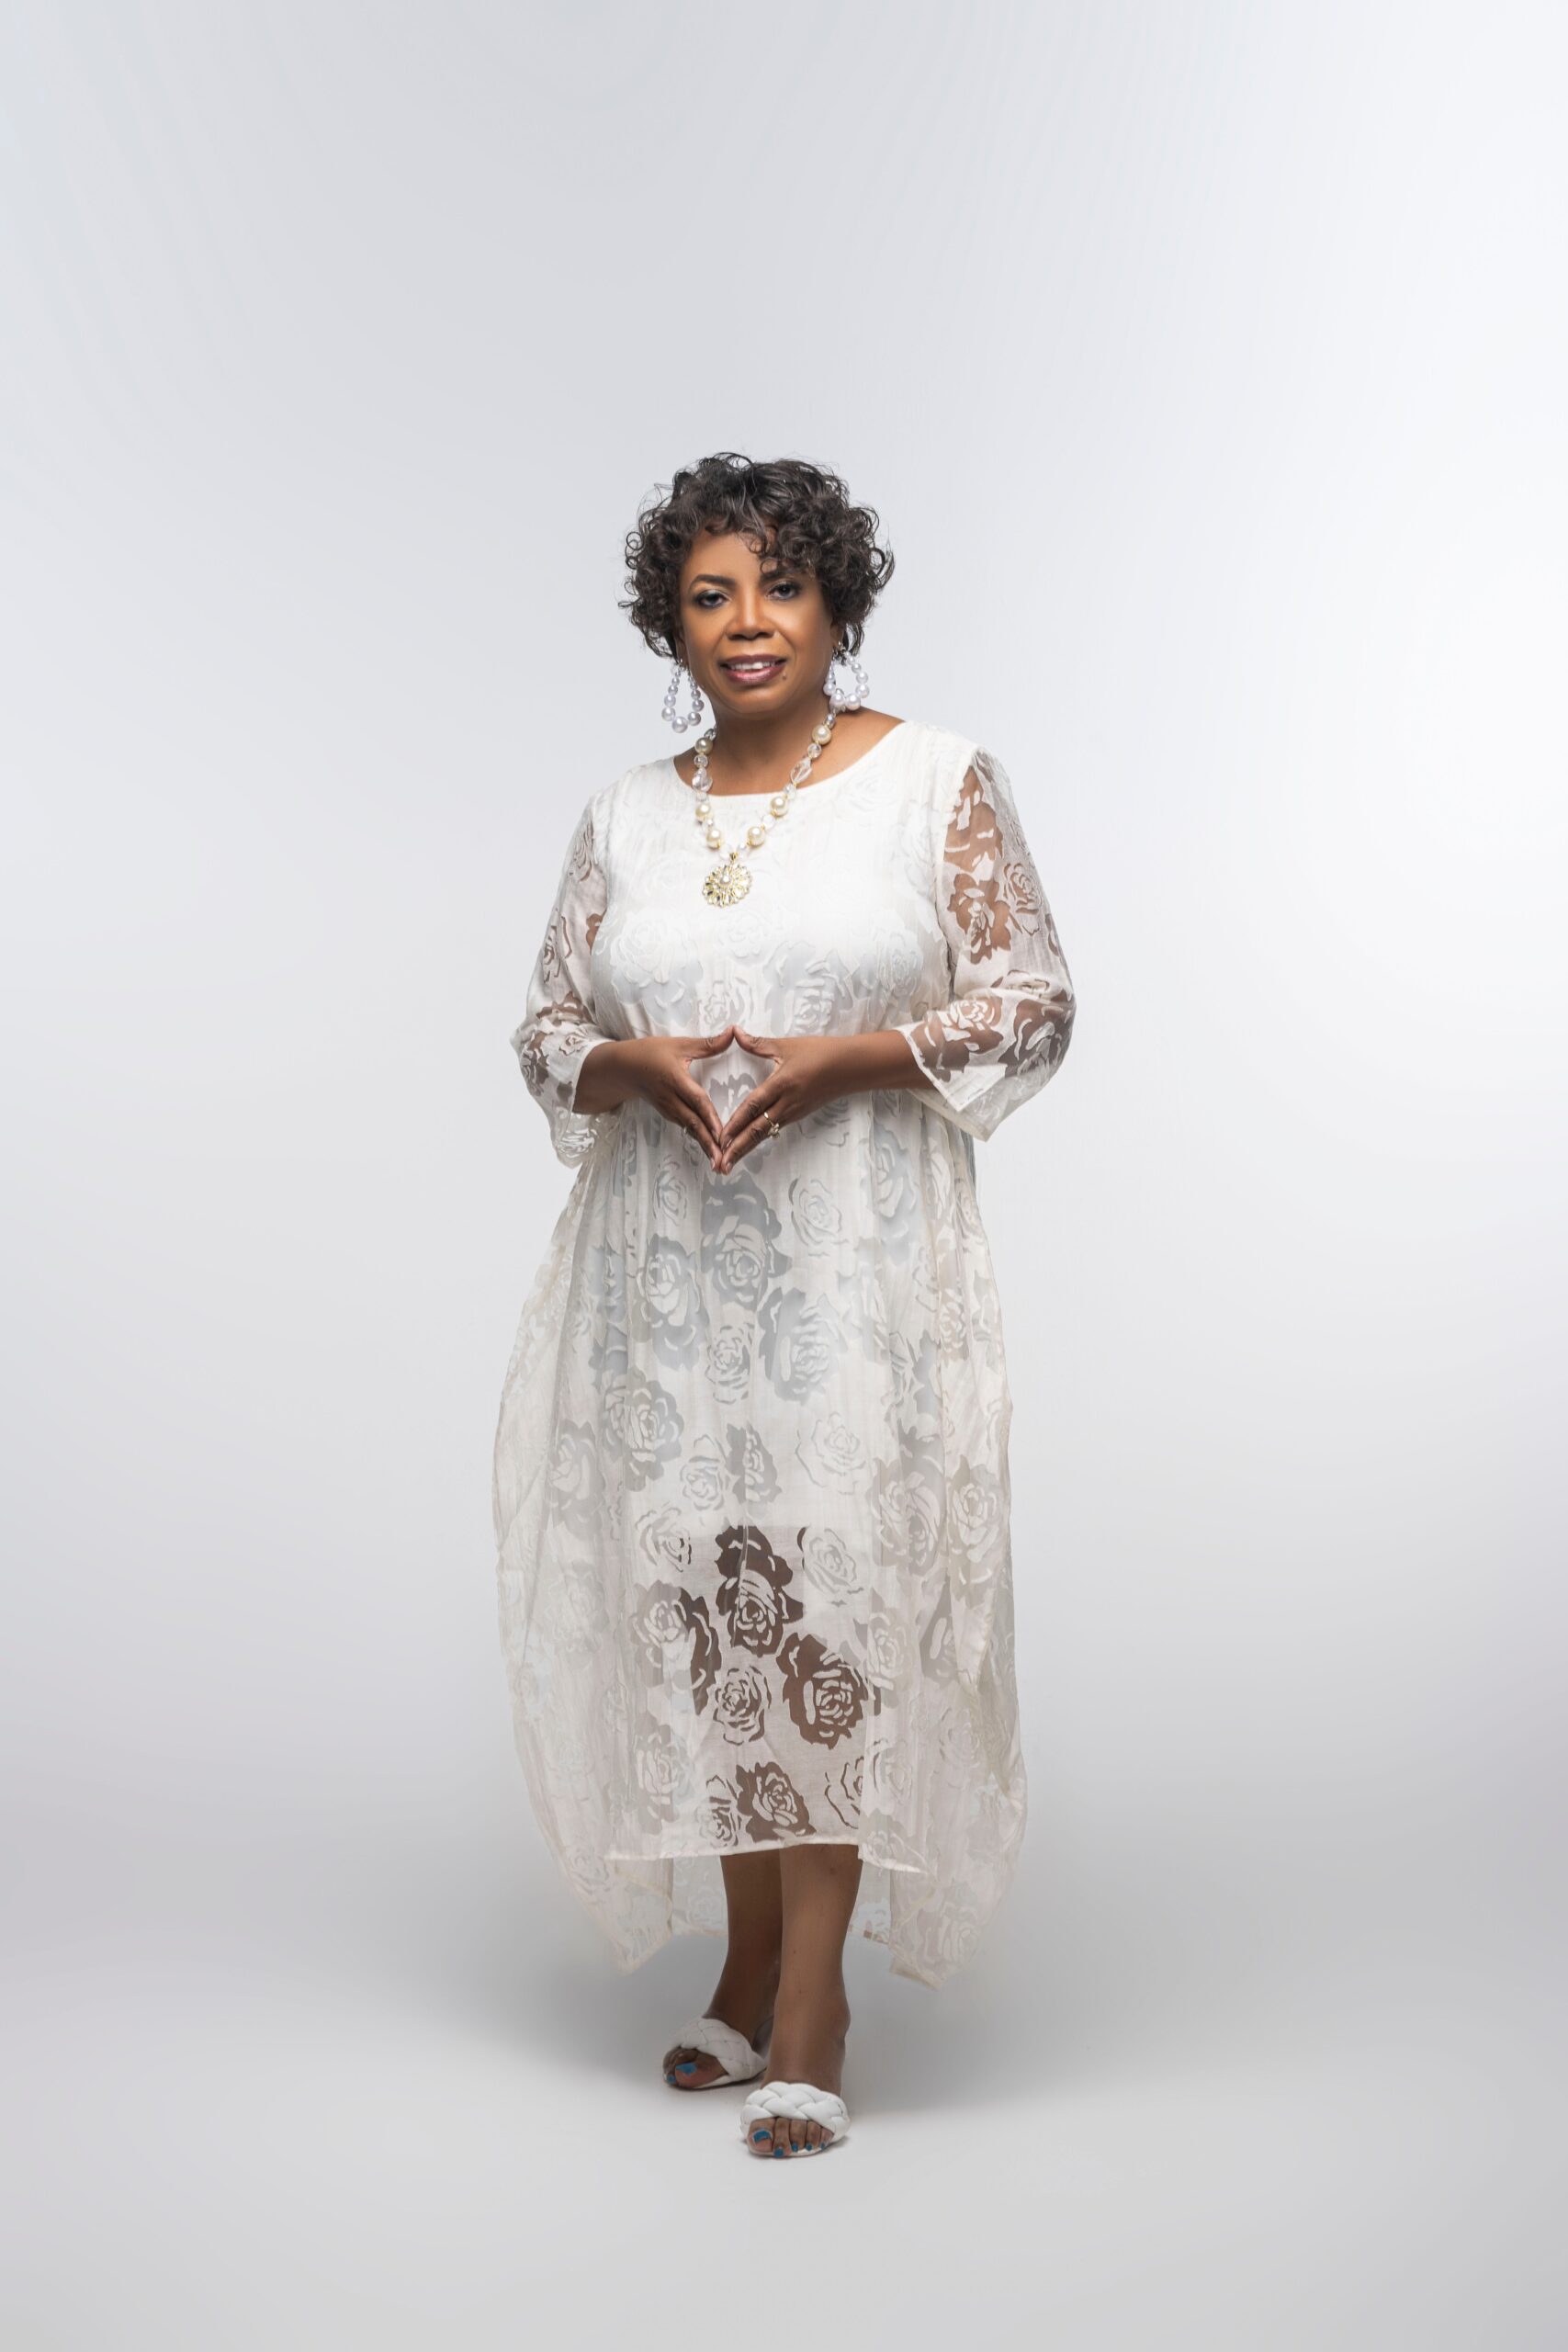 Uplifting and Soothing Audiences with Upbeat & Spiritual Compositions- Celeste Wells Stuns with New Gospel Record